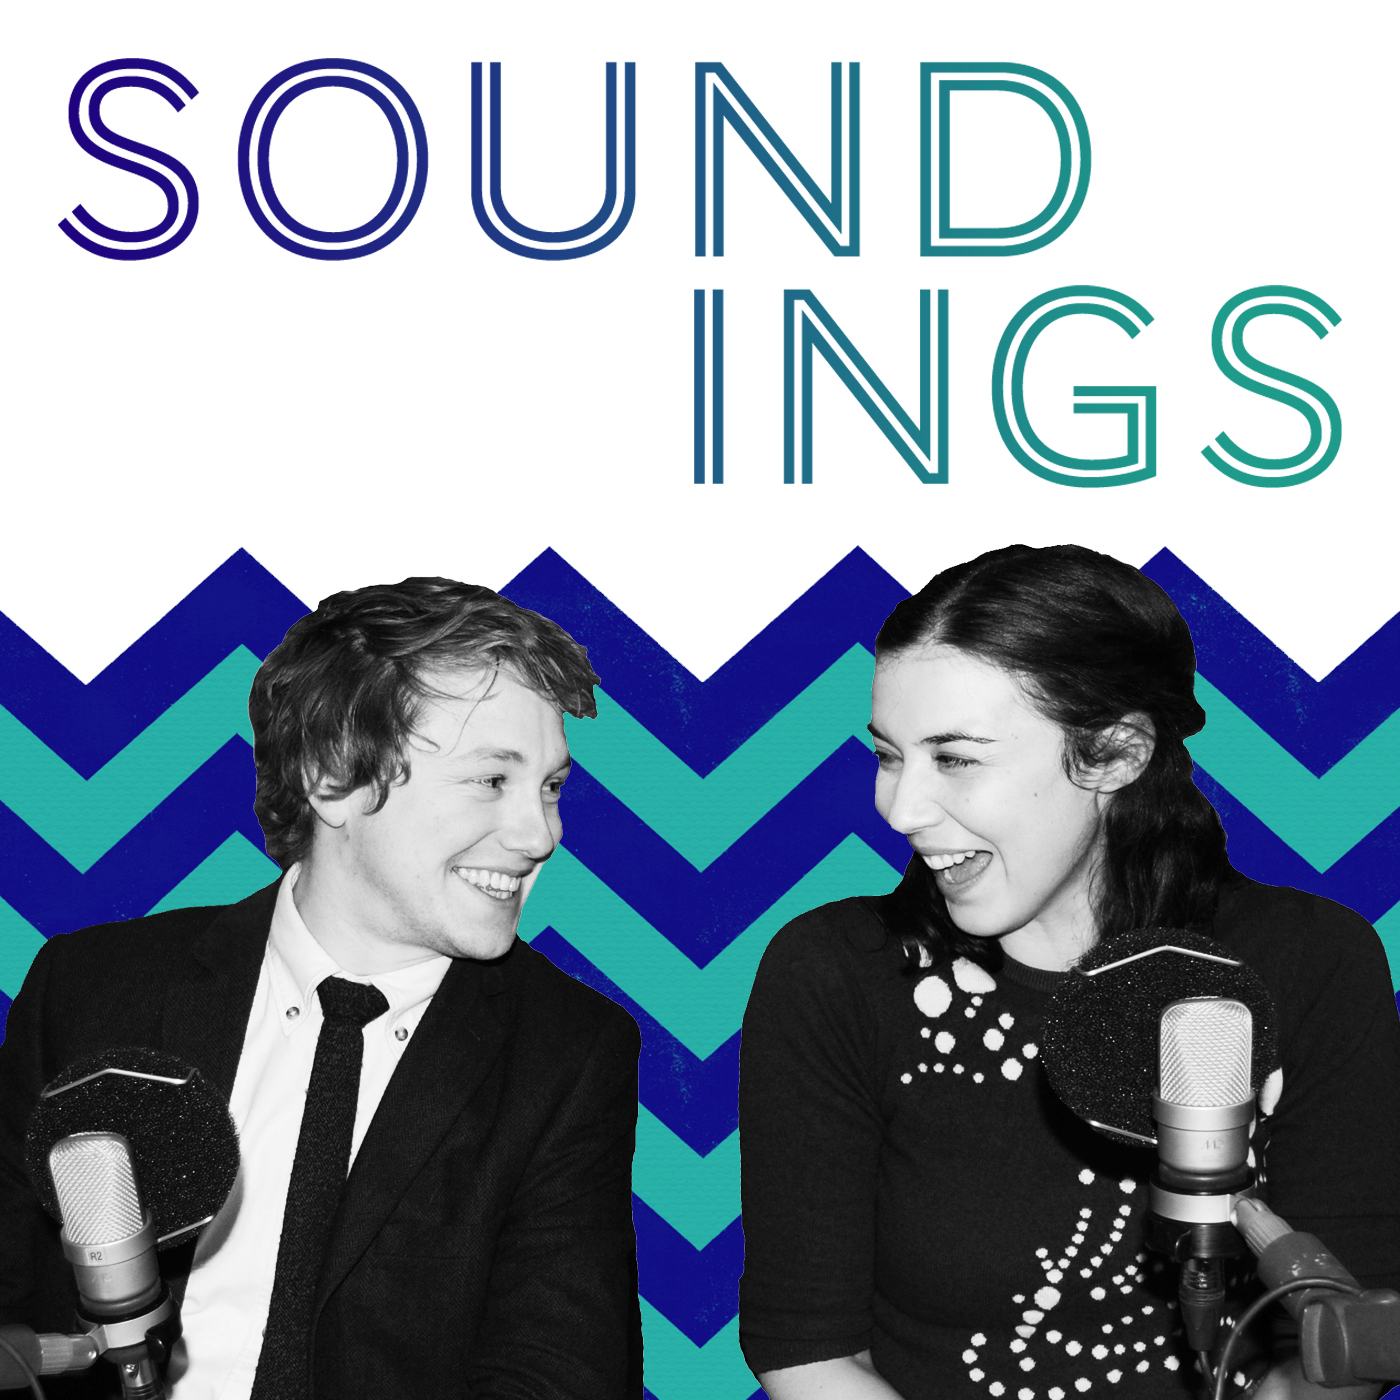 Soundings S1 E5: HARRY SHEARER! (Spinal Tap/The Simpsons)